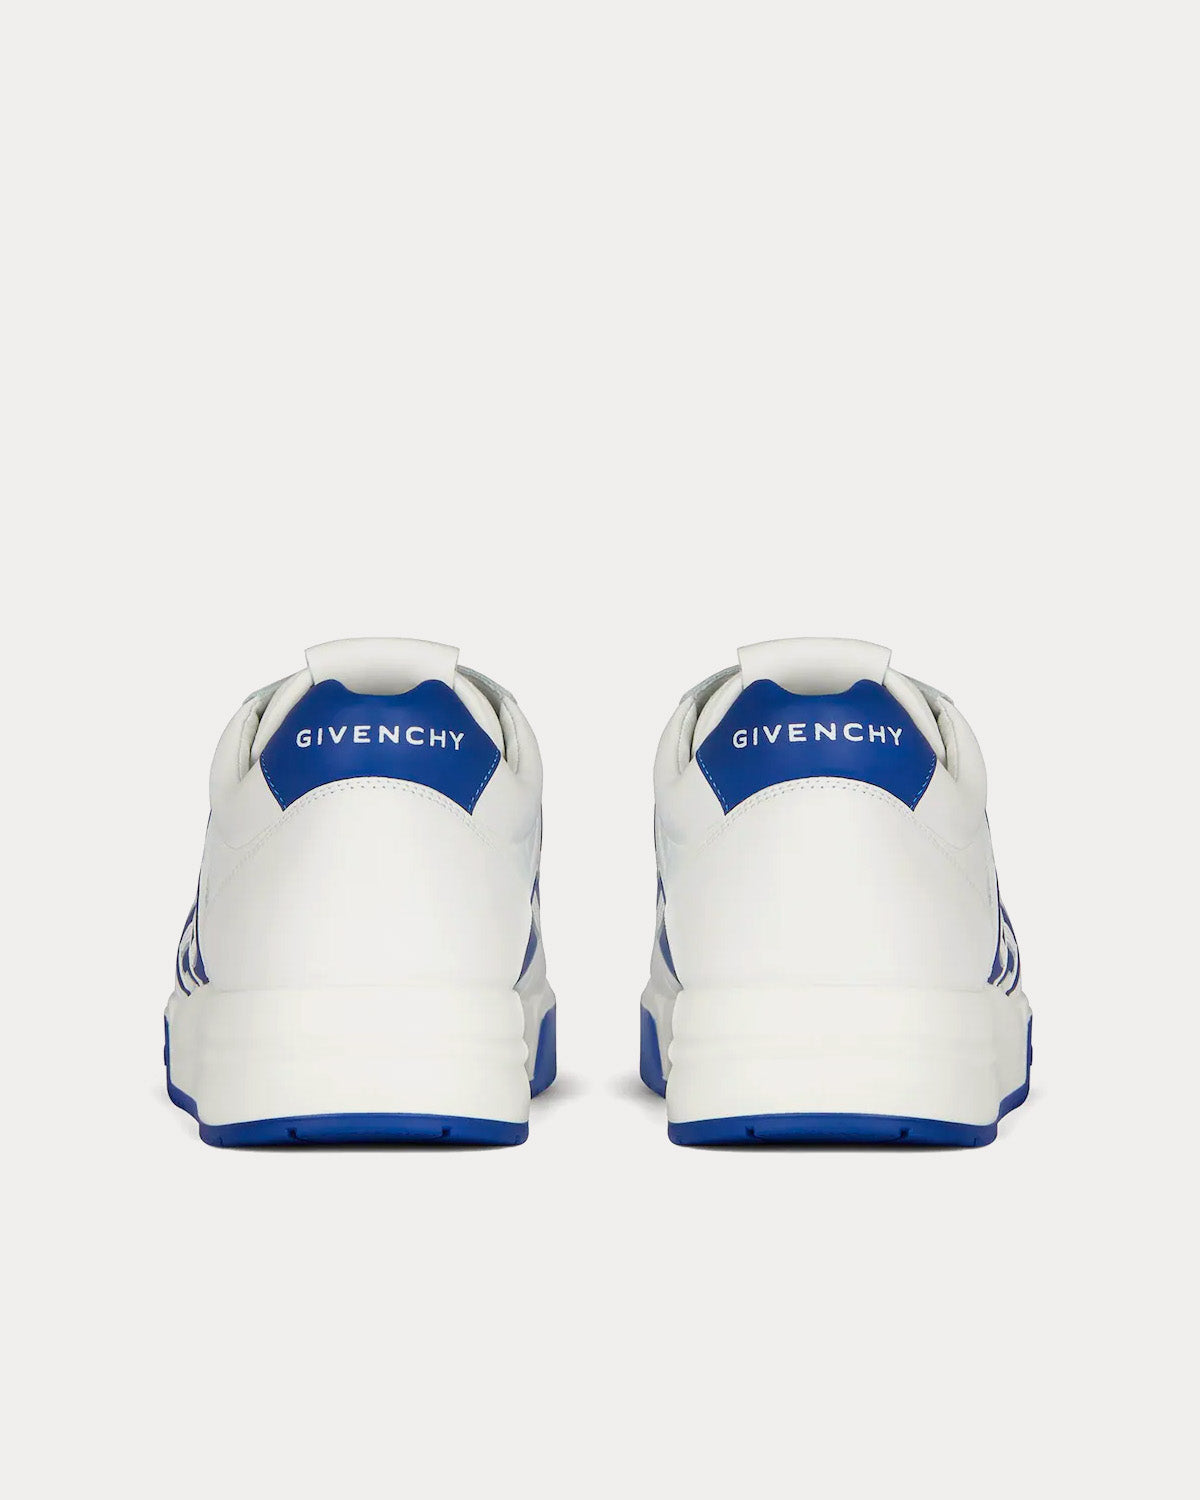 Givenchy - G4 Leather White / Blue Low Top Sneakers